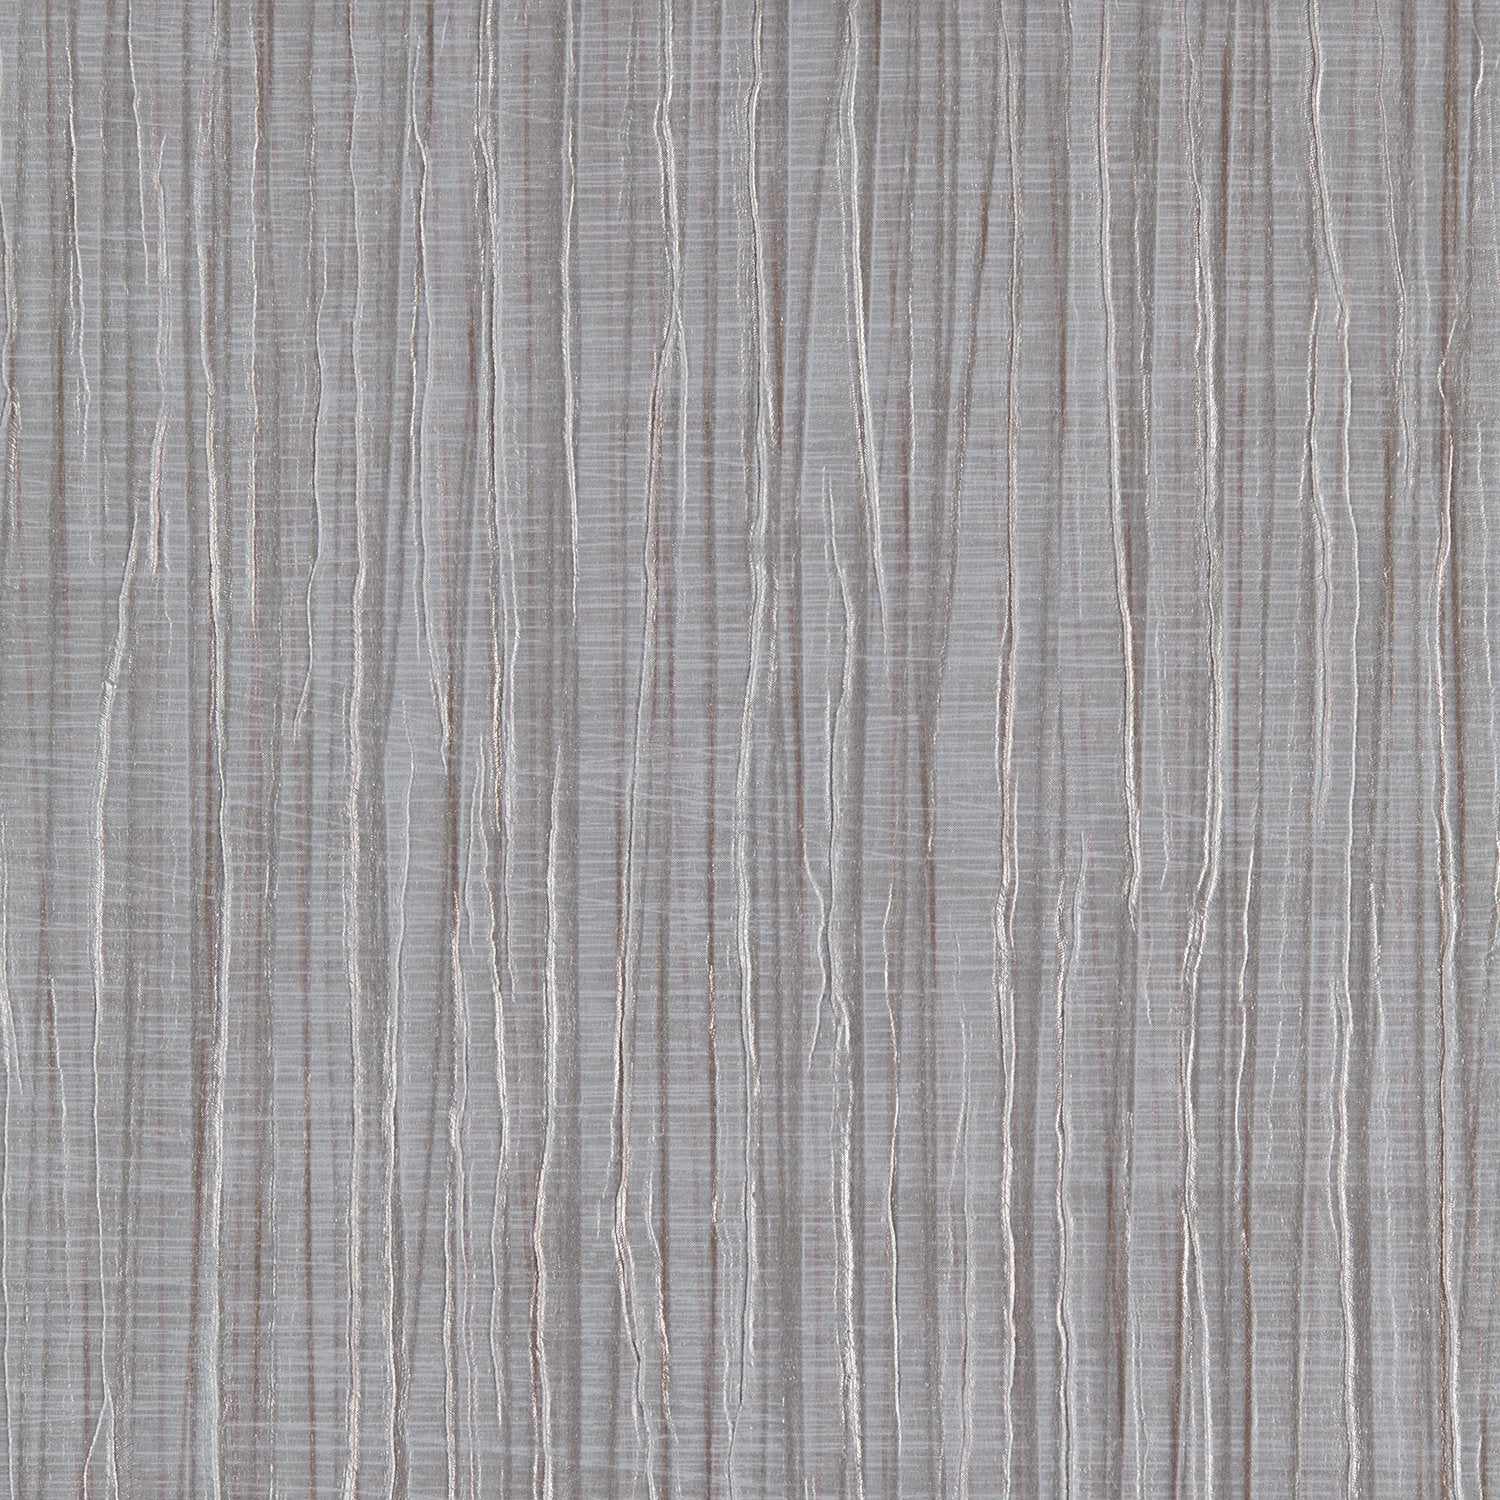 Vogue Pleat - Y47015 - Wallcovering - Vycon - Kube Contract